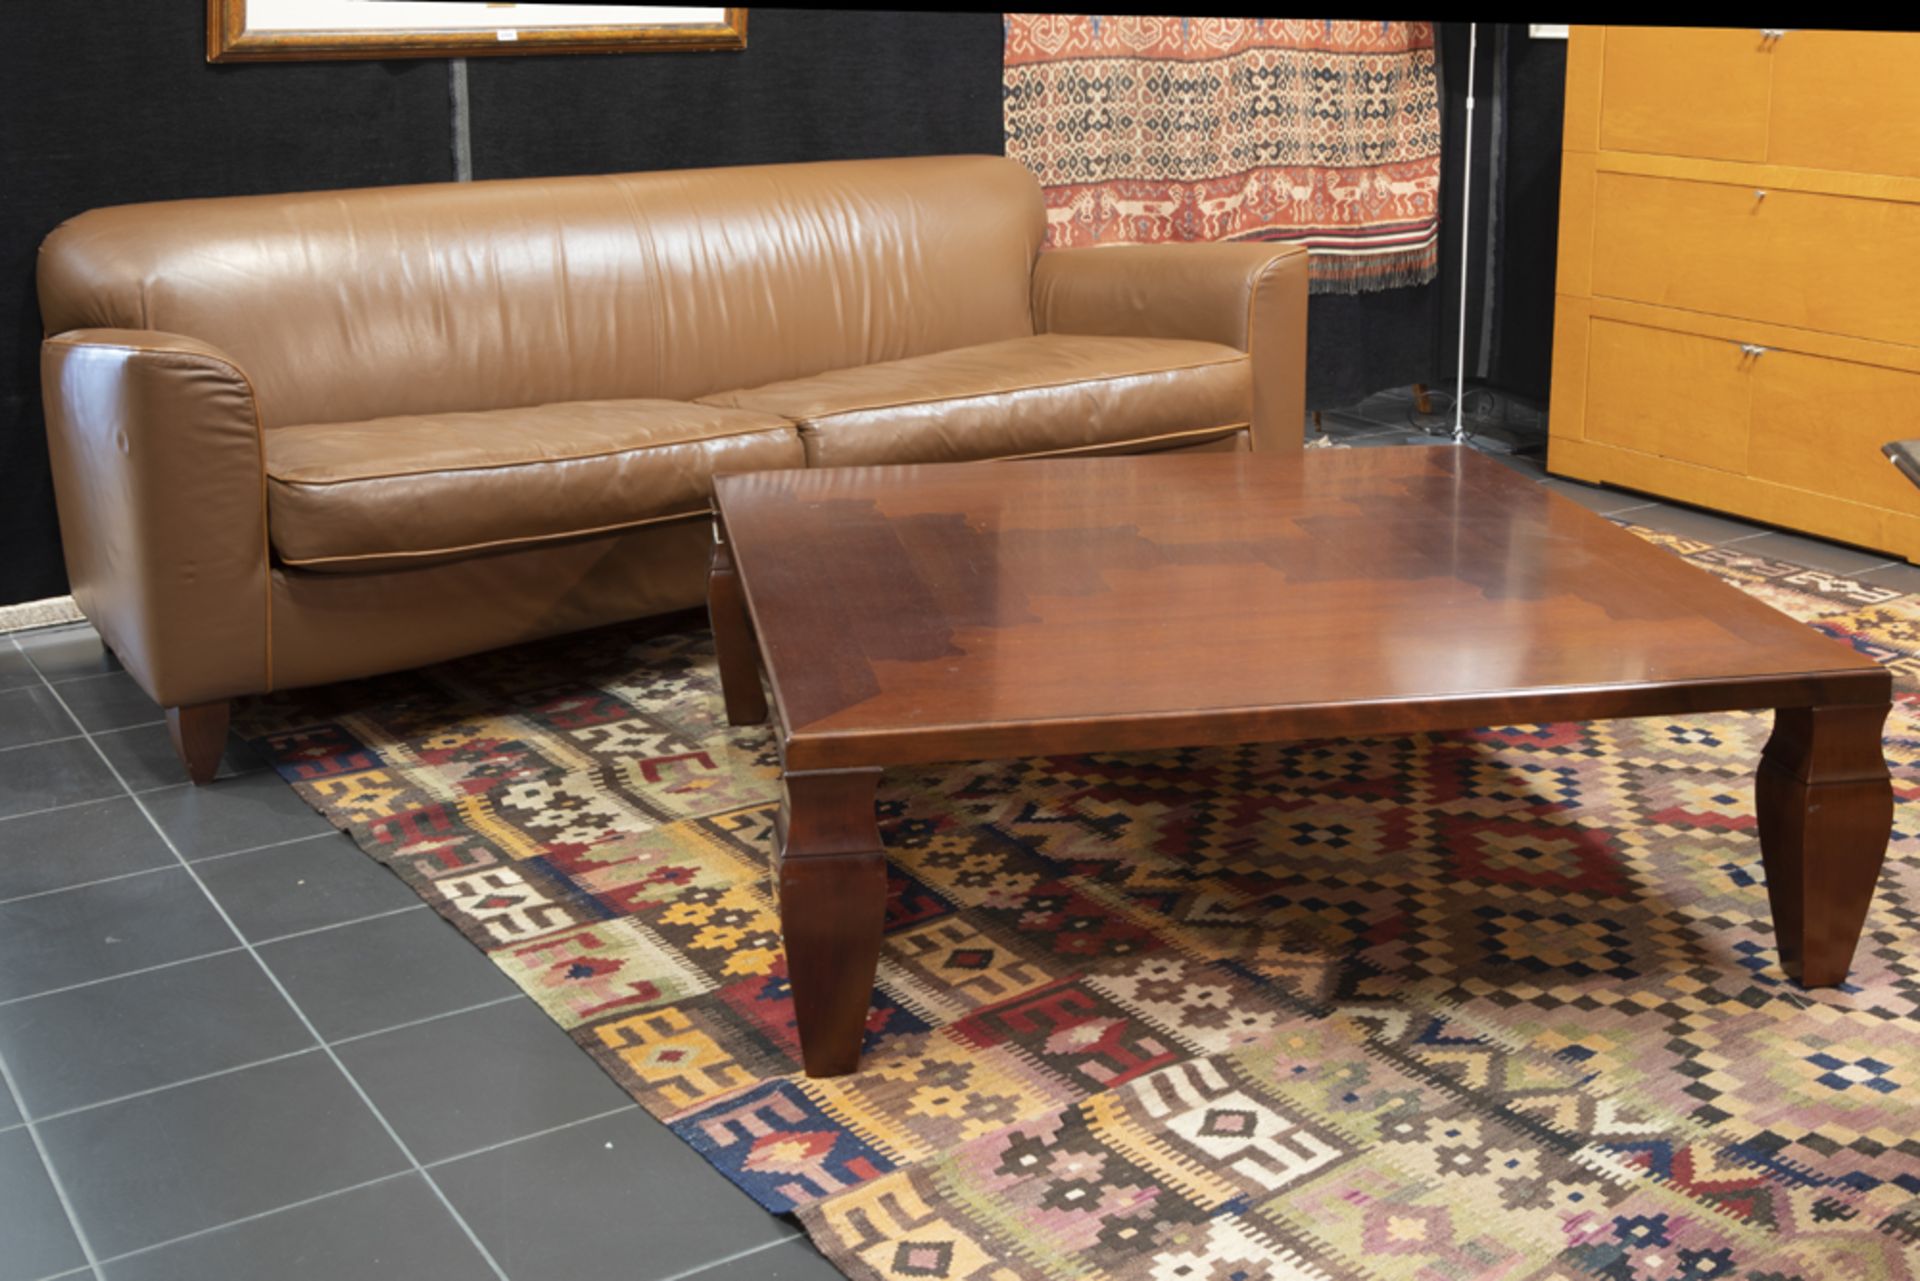 Italian Giorgetti marked set of a leather sofa and a coffeetable with a design by Leon Krier||